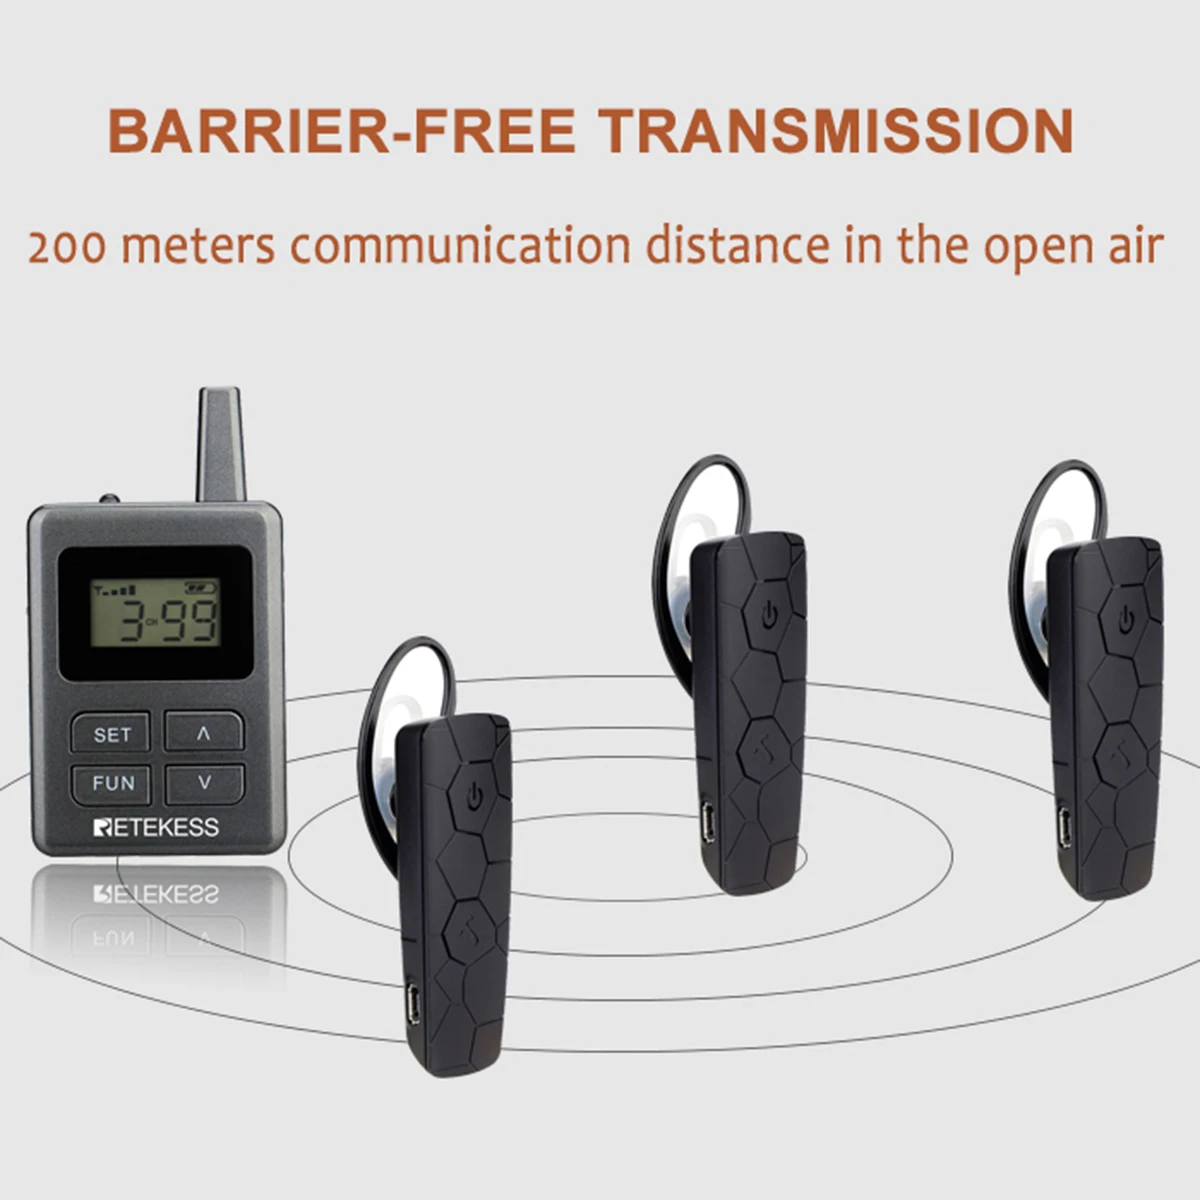 

Retekess TT108 2.4GHz Professional Ears Hanging Wireless Tour Guide System for Traveling Museum Visit Conference Church